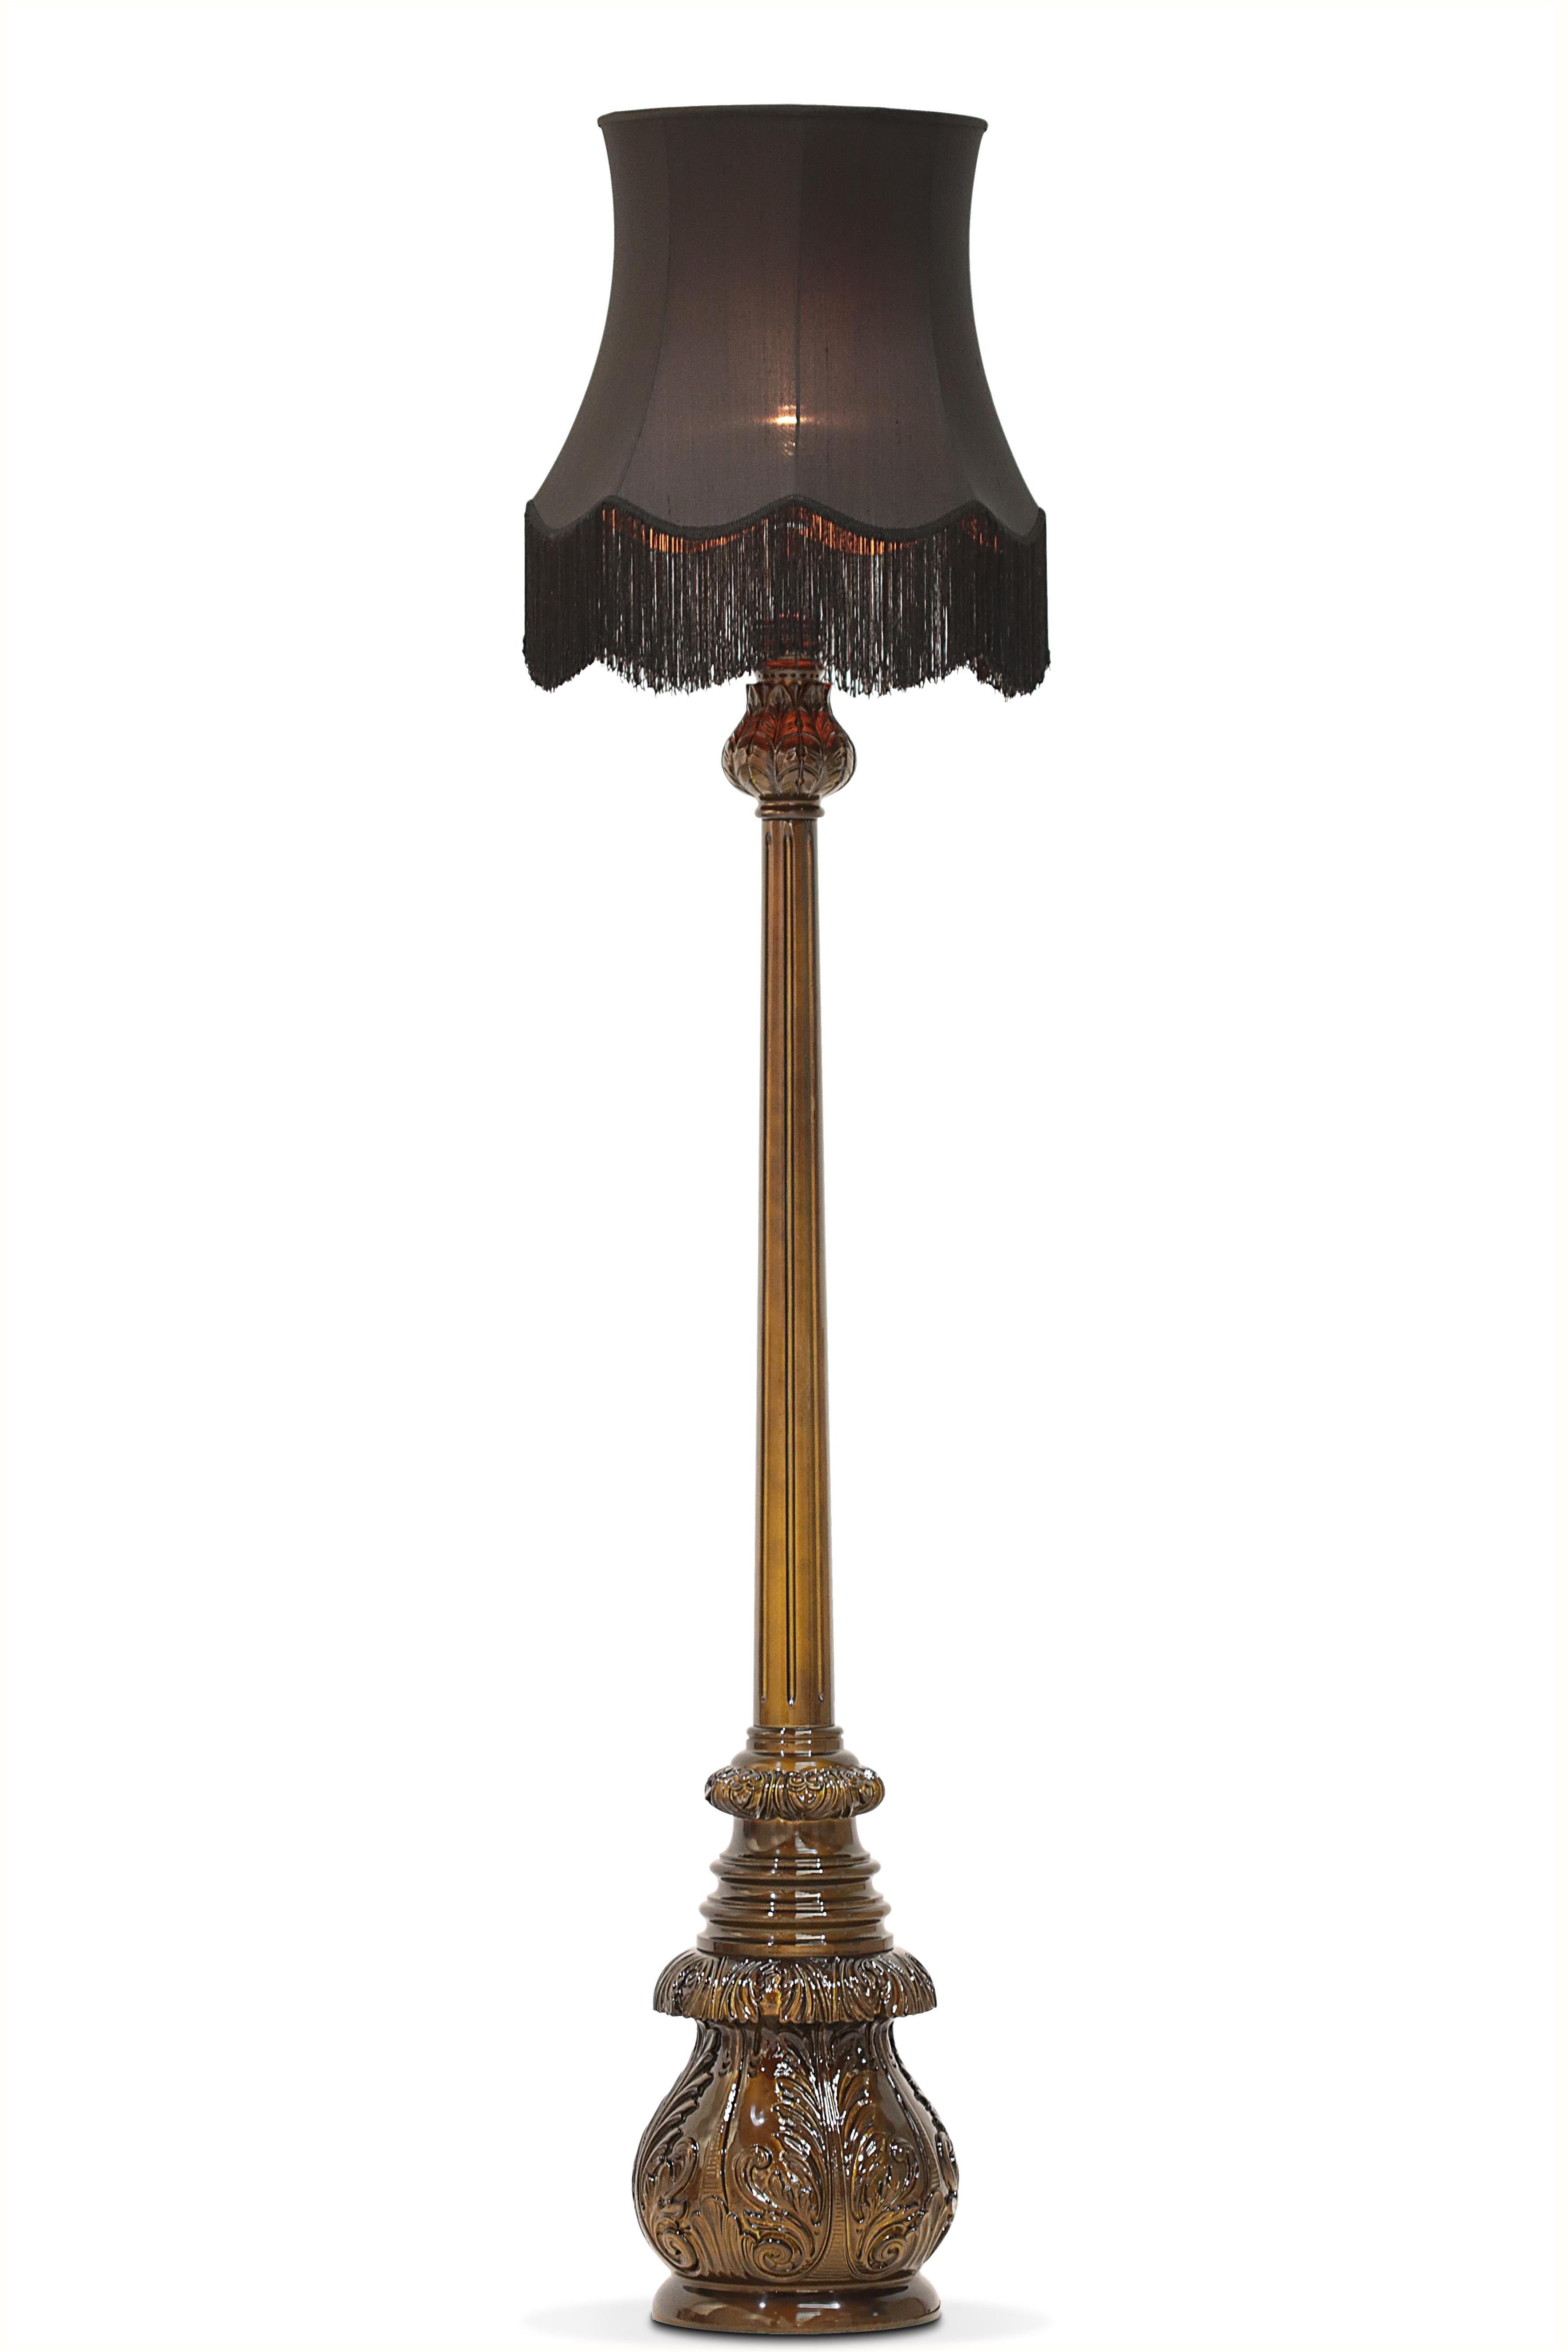 The poetic Lotus floor lamp is a dramatically exquisite way to add splendor to any setting. Luxury craftsmanship is present in the meticulous hand carving and finishing of the base.

Structure: Iridescent green with high gloss finish 
Lamp shade: